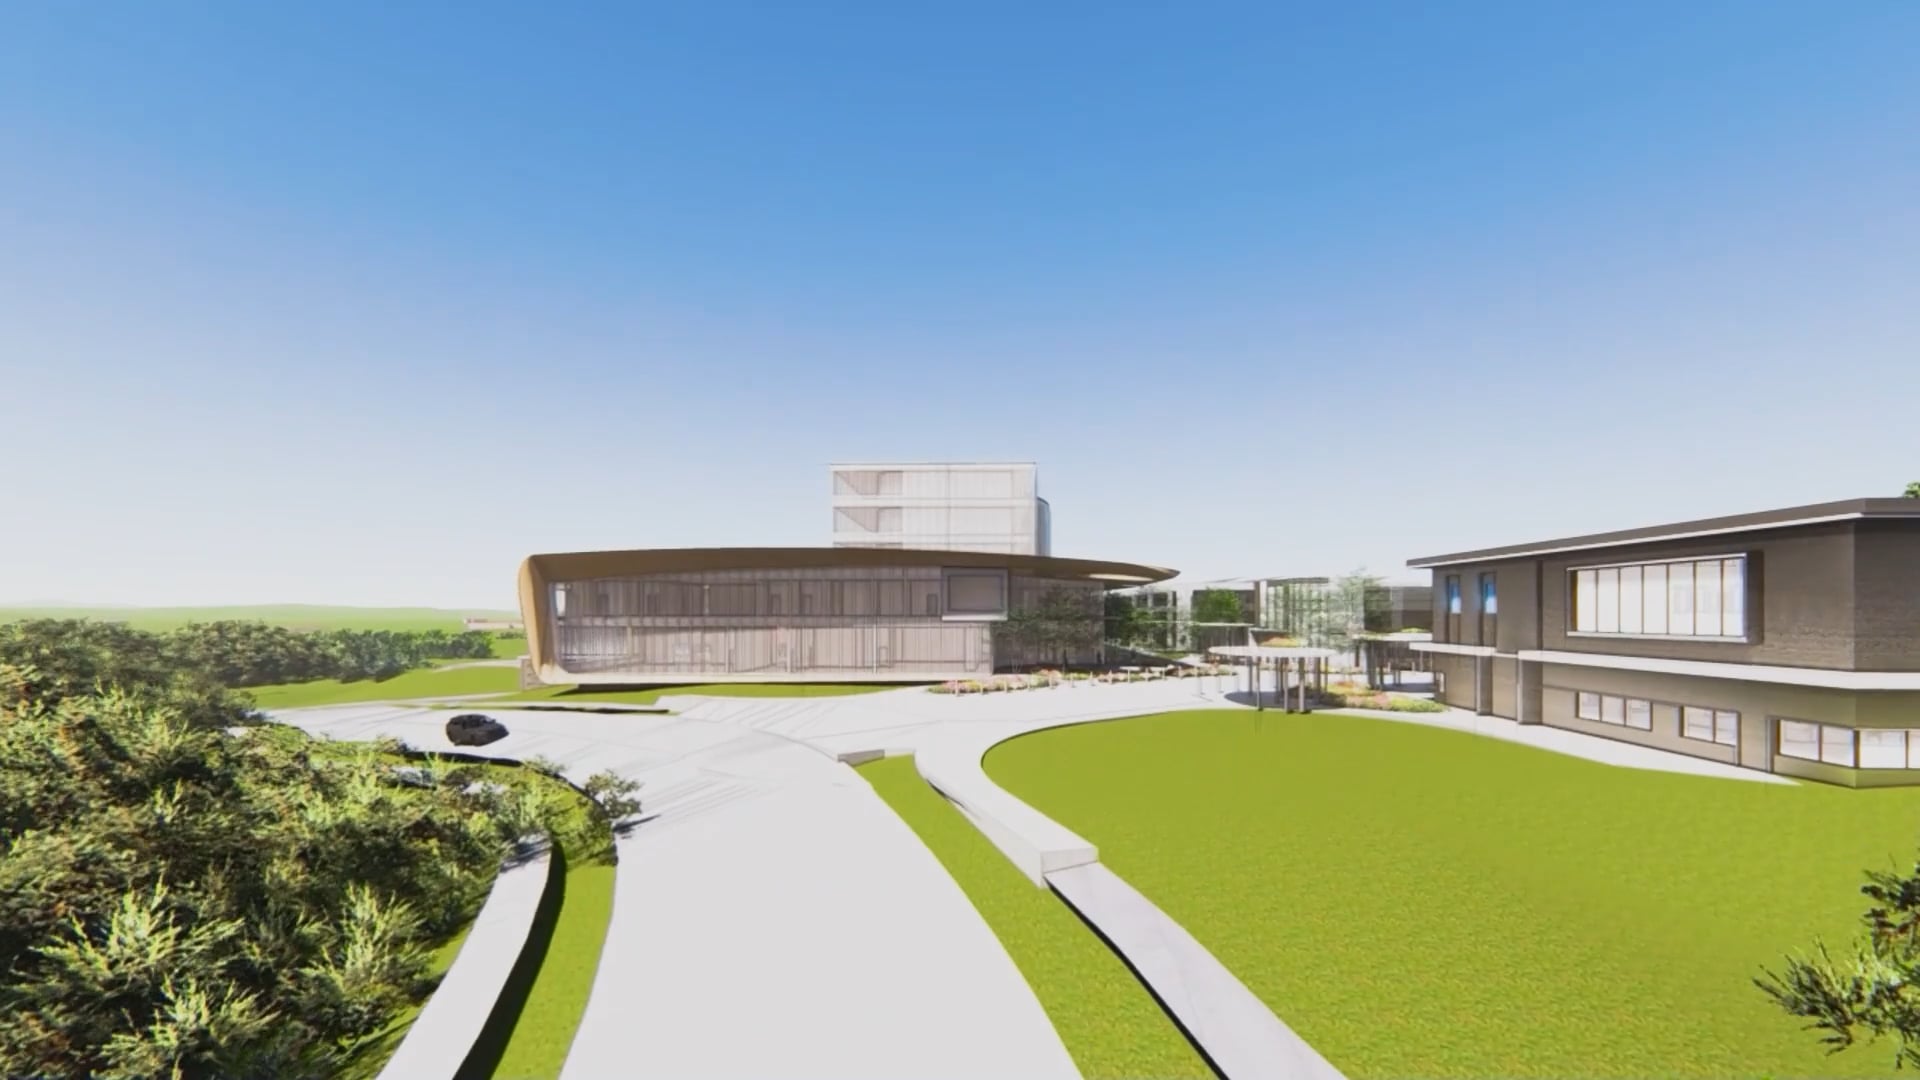 Design concept for a youth treatment facility, large green lawn welcomes people to the low-lying building